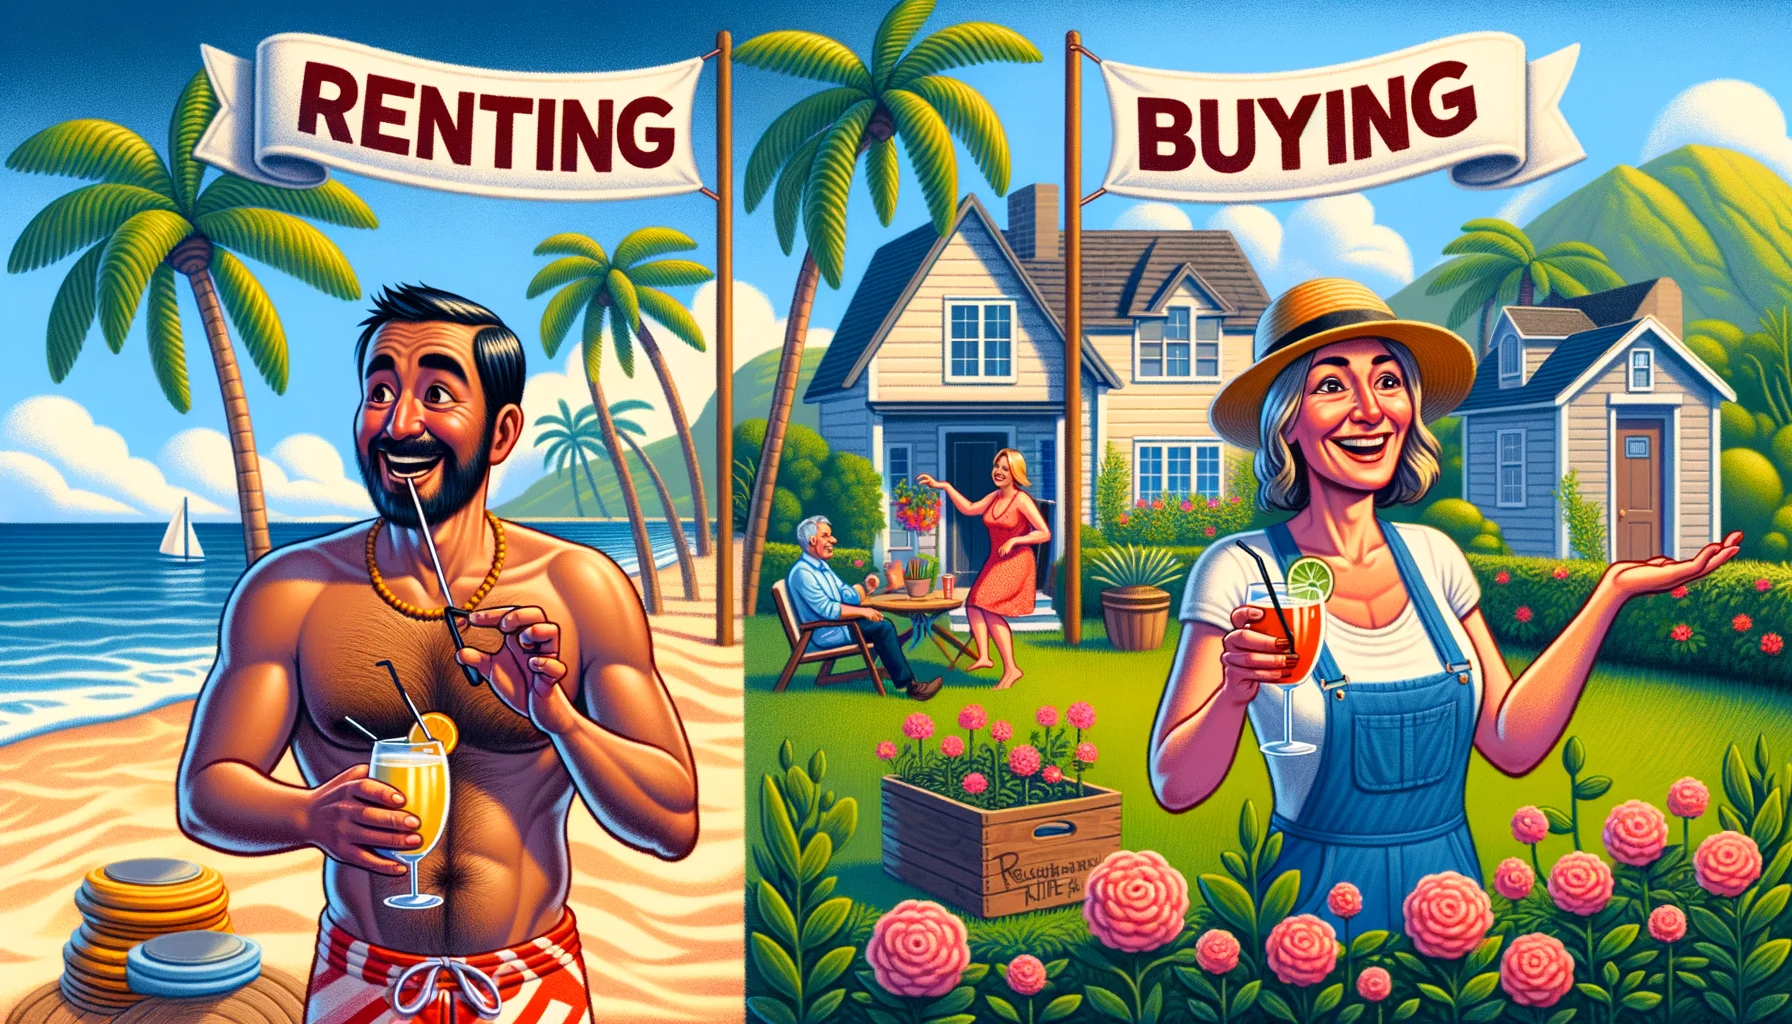 Create a humorously exaggerated image that brings to life the ideal scenario of renting versus buying: on one side, depict a relaxed and happy man of South Asian descent, sipping a drink on a tropical beach under a palm tree, a banner overhead with the words 'Renting Life'. On the other side, show a proud Caucasian female homeowner, happily planting flowers in the garden of a picturesque cottage, with a banner saying 'Buying Life'. Both sides are filled with joy and satisfaction, symbolising the best possible outcomes of both choices.